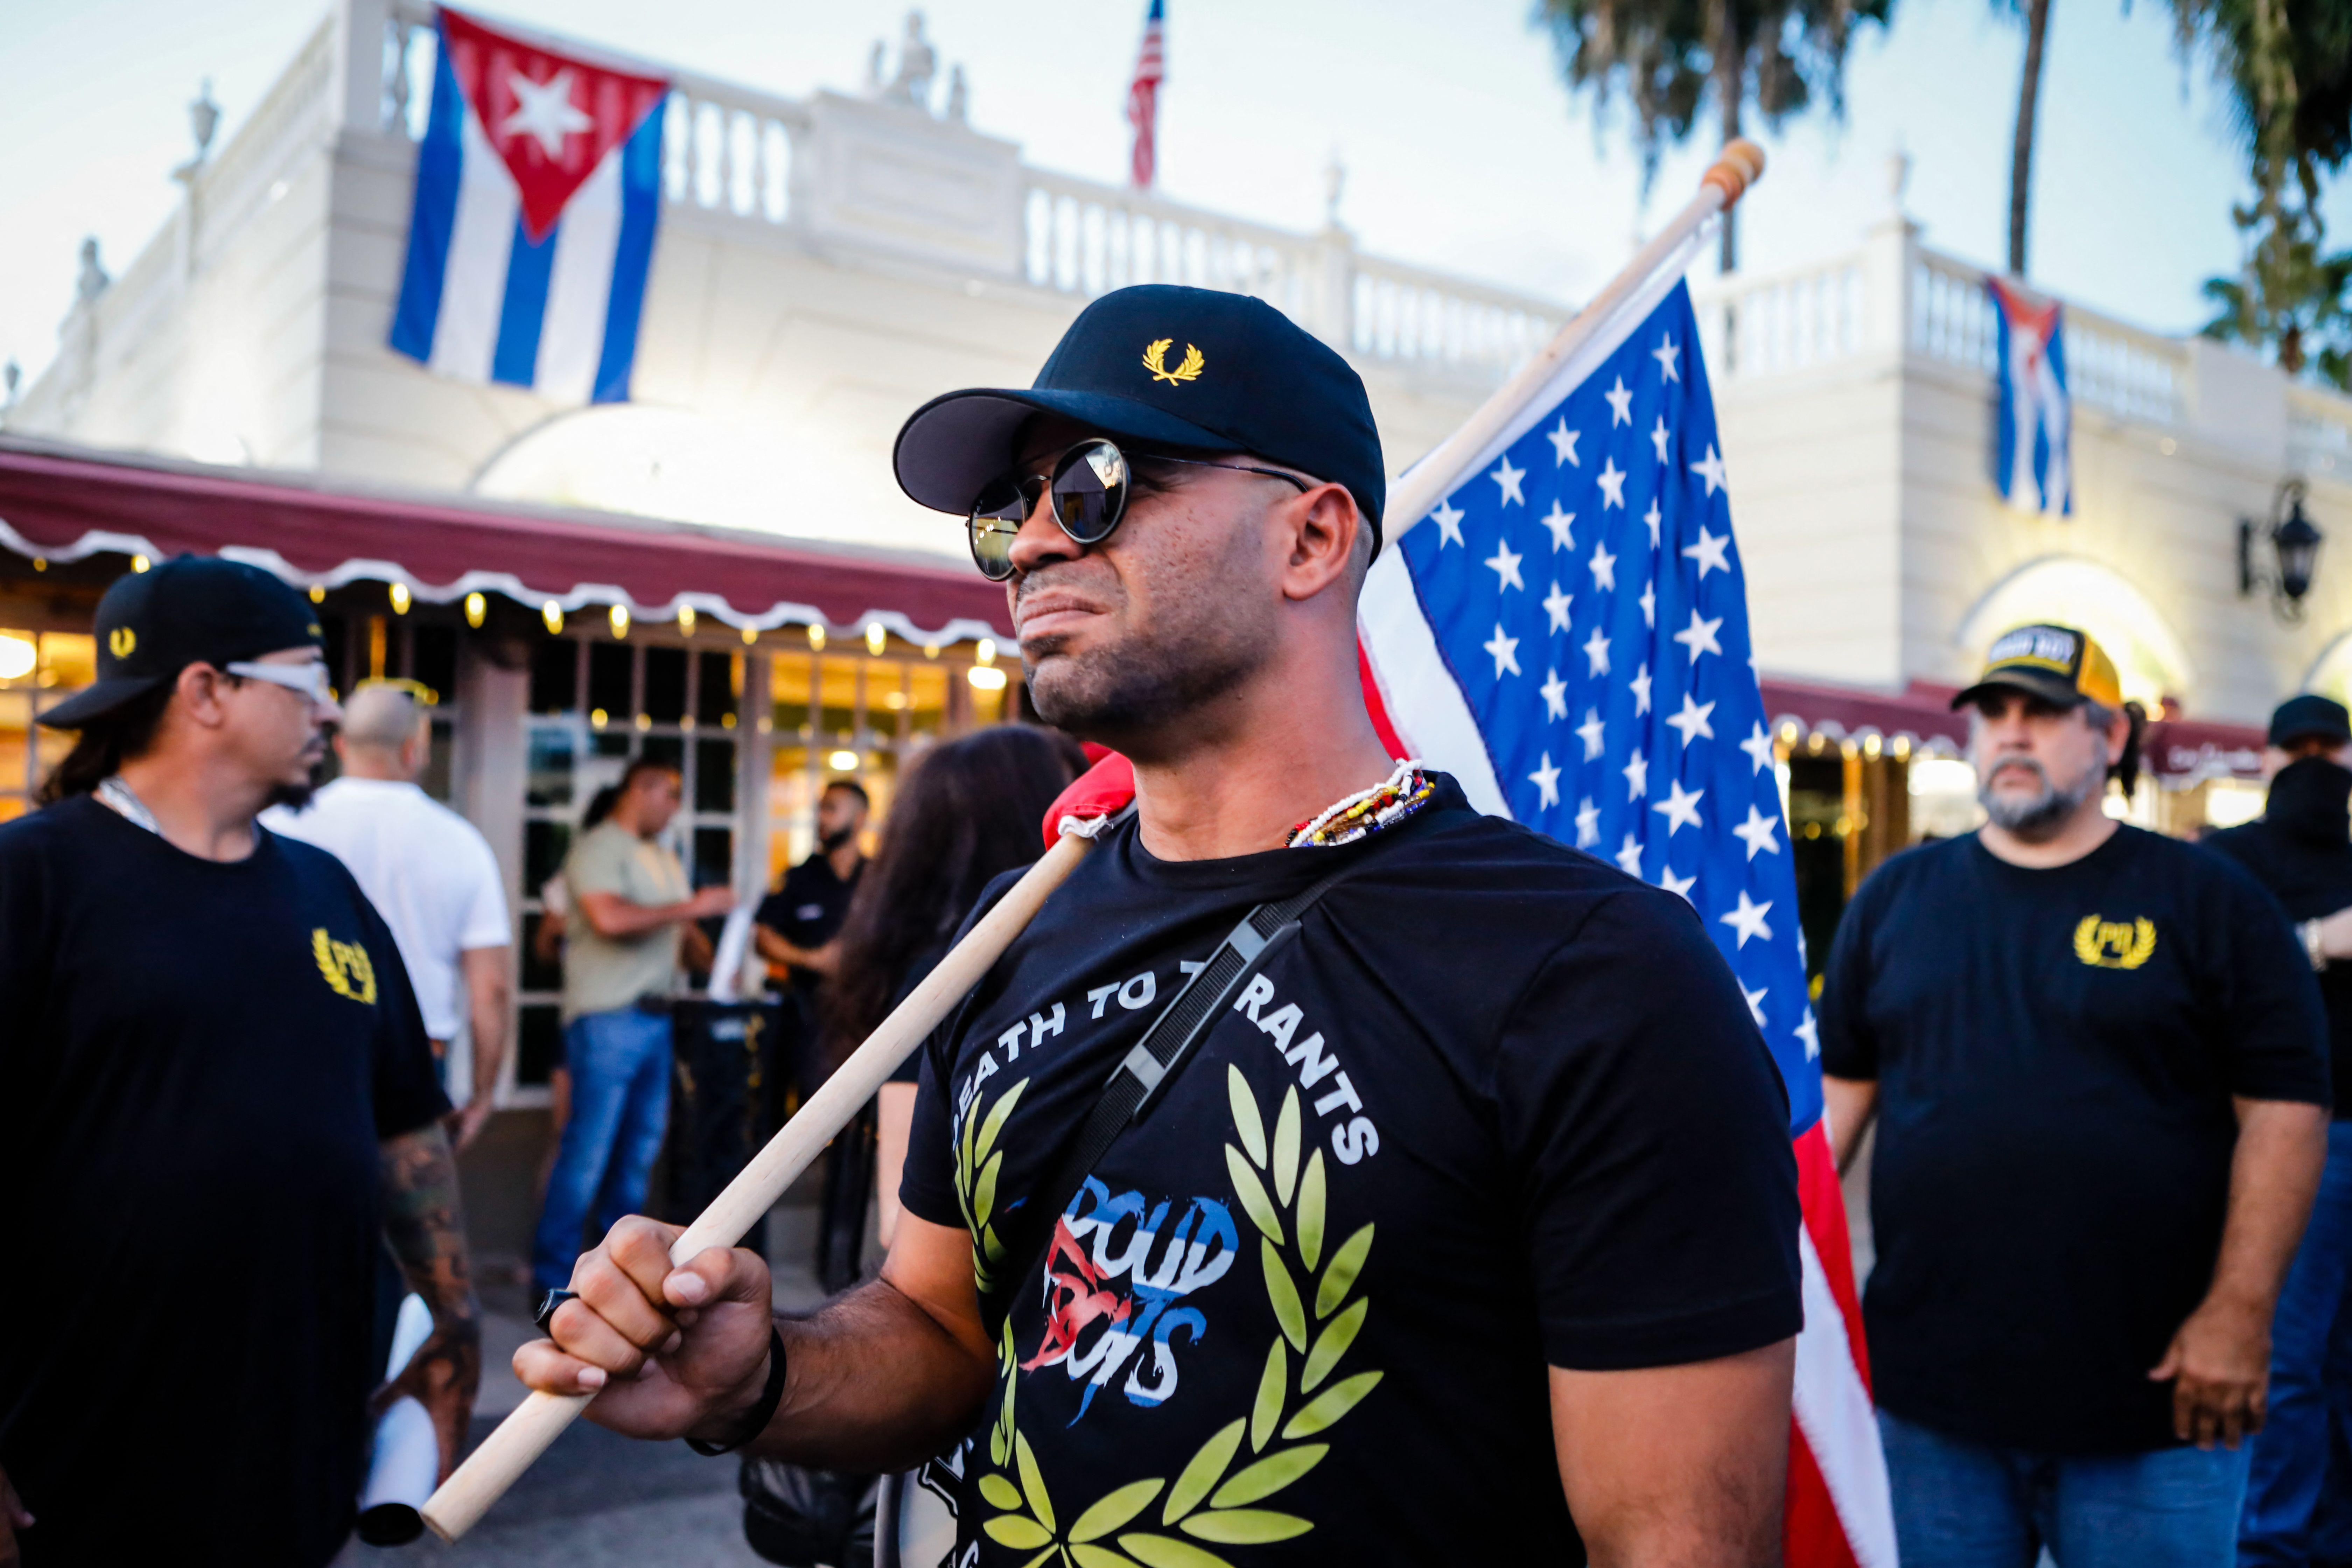 Tarrio wearing a Proud Boys T-shirt and holding an American flag over his shoulder as he marches in a street during a protest